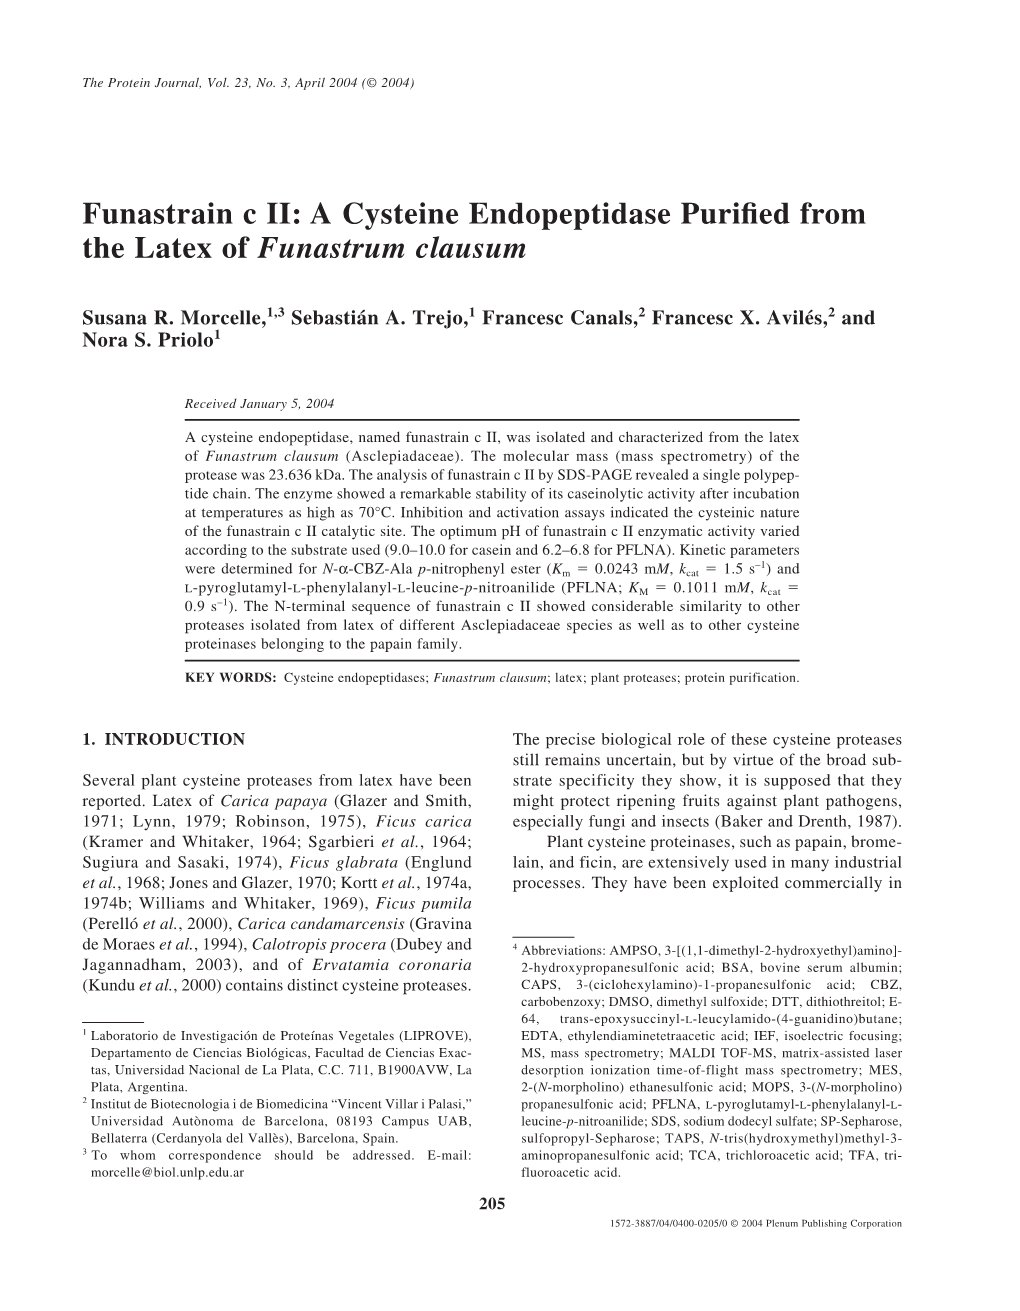 A Cysteine Endopeptidase Purified from the Latex of Funastrum Clausum